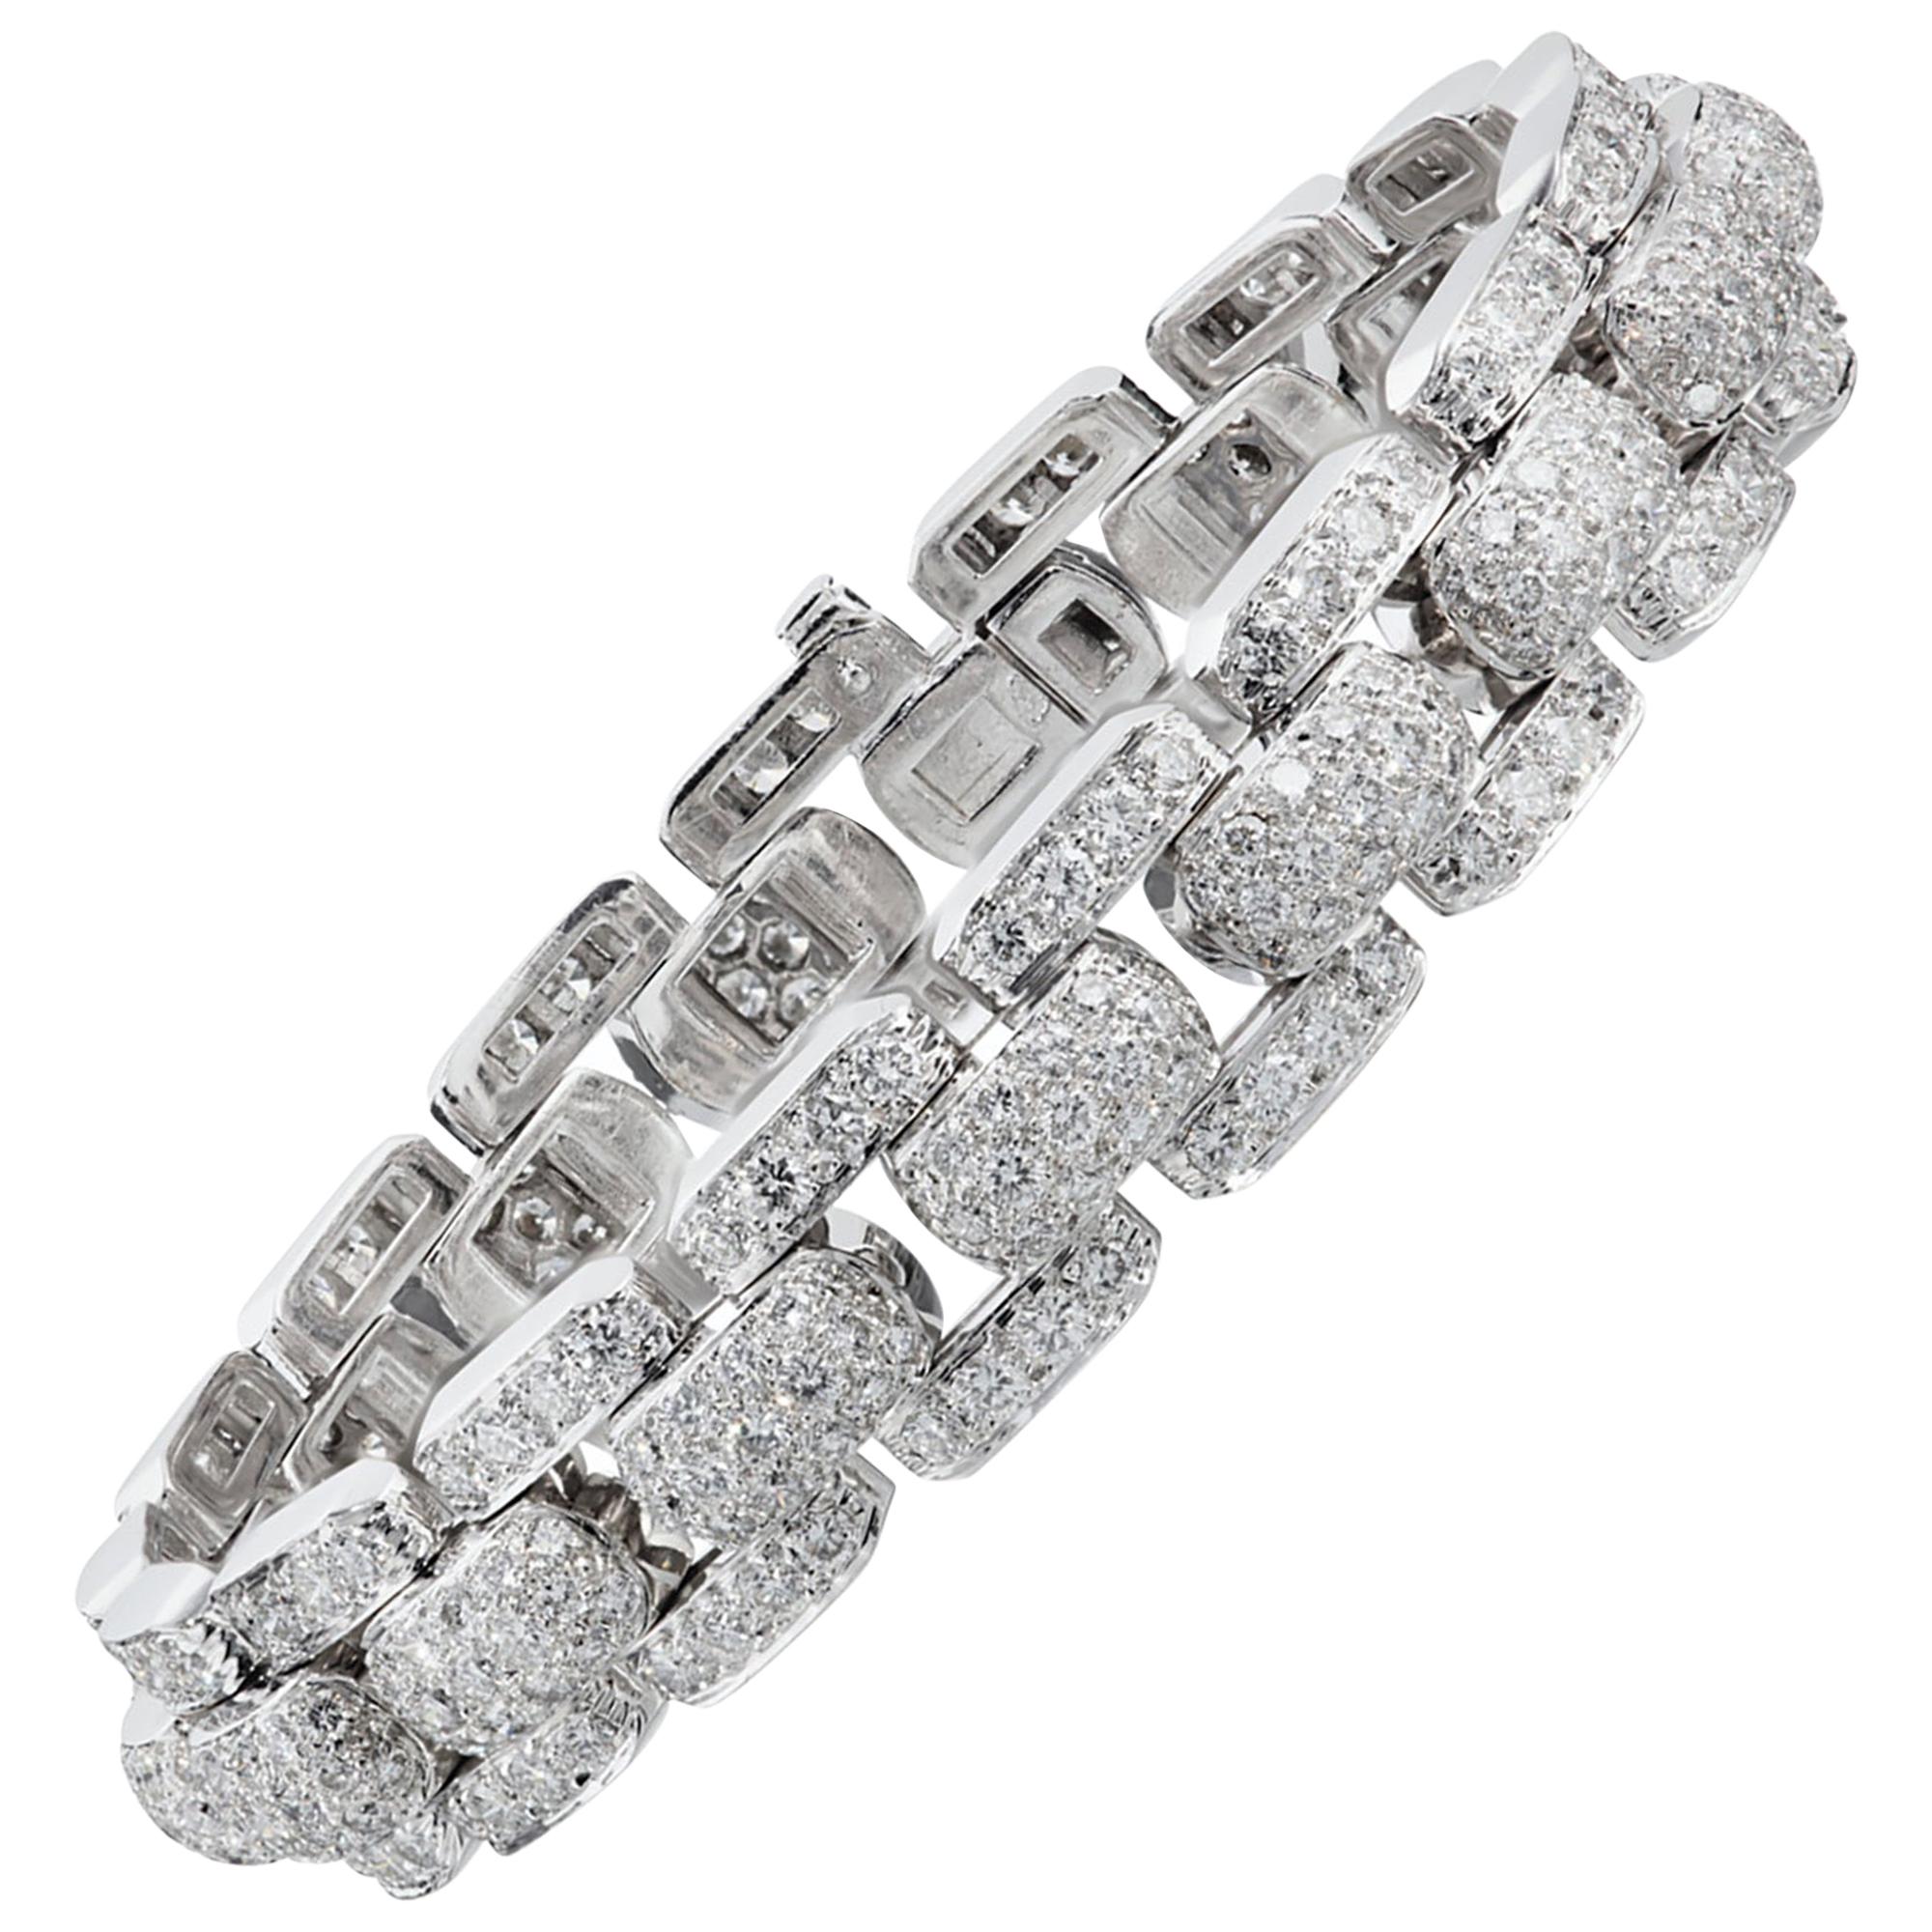 A beautiful bracelet decorated with diamonds and set in 18K white gold. Made by Cartier in France.
There are 442 round diamonds weighing 15.30 carats total. The diamonds are equivalent to F-G colors, VVS-VS clarity.
Weight of the bracelet is 42.36